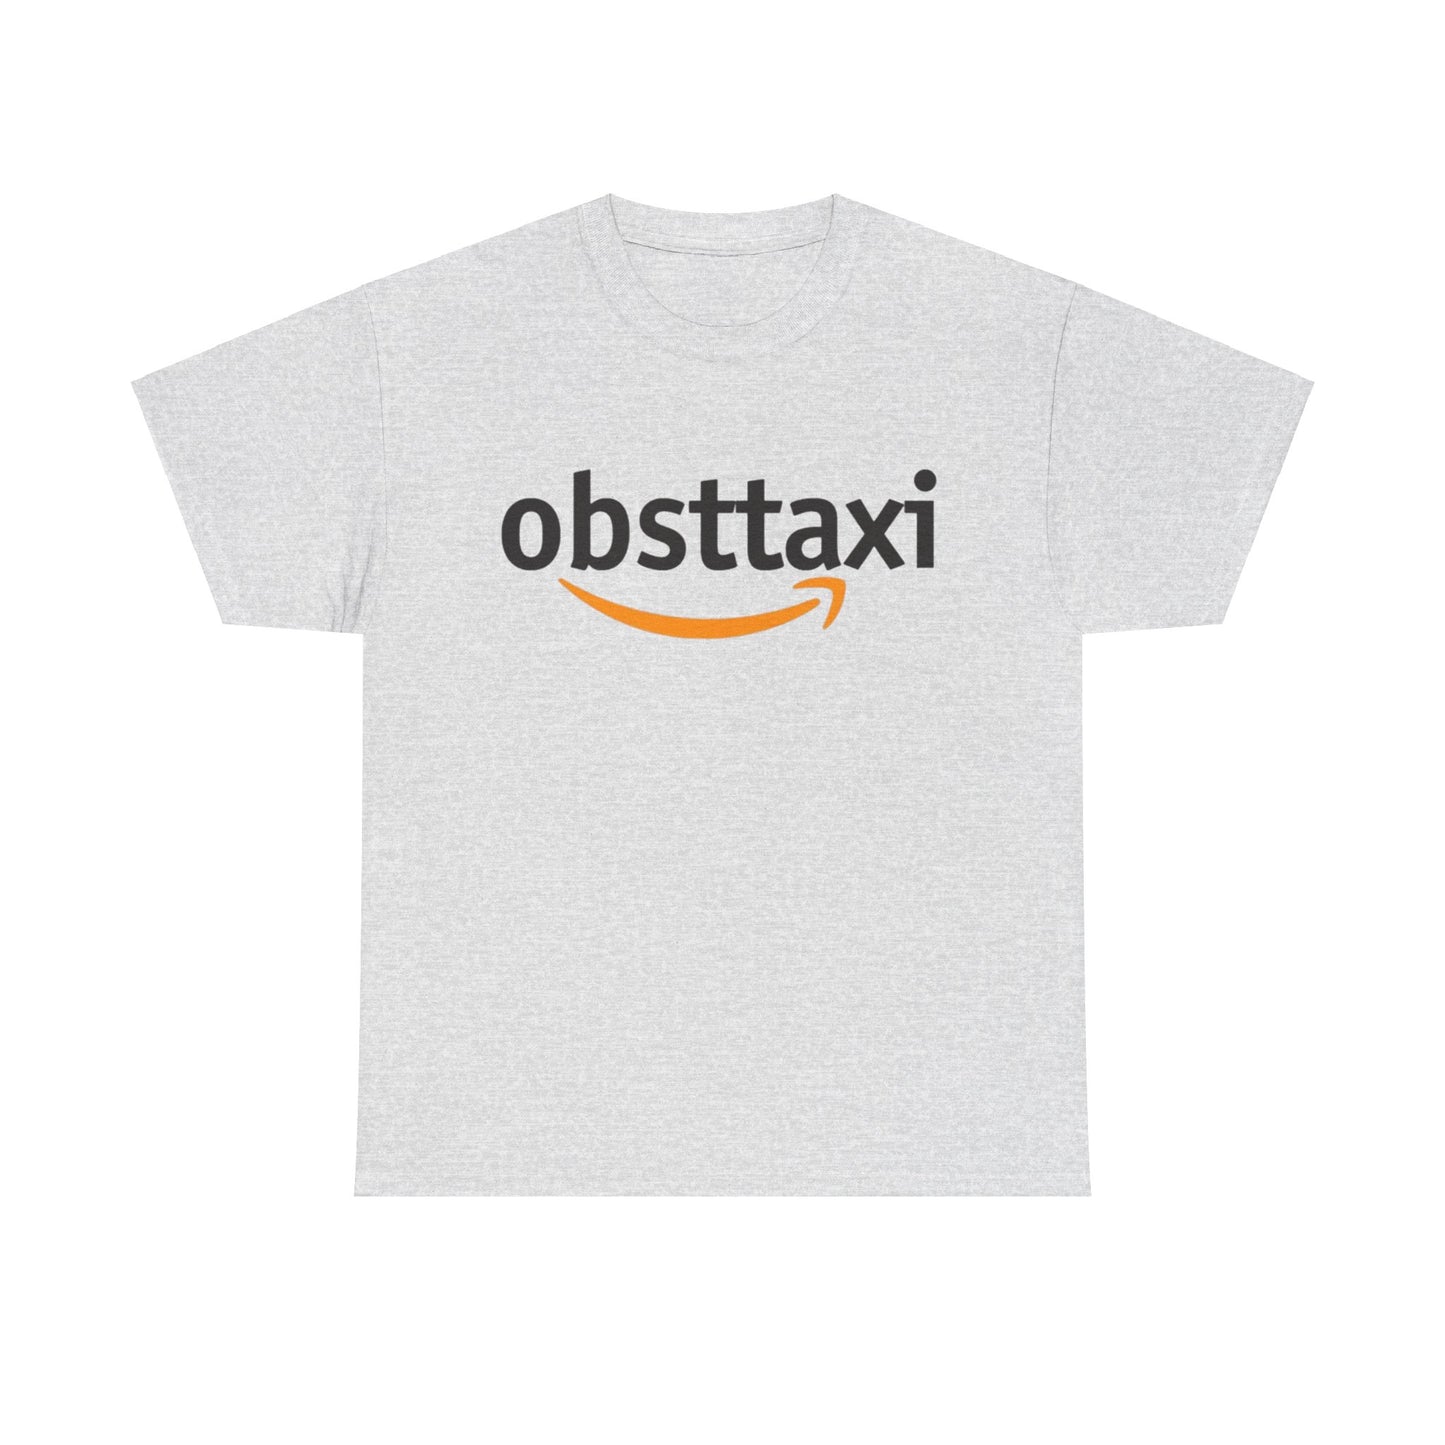 Amazon Meme Shirt Gift for Teenagers, Amazon Obsttaxi T-Shirt, Amazon Prime Merch T-Shirt, Suprise Present for Boys and Girls Unisex fit, Baumwolle Cotton high Quality Basics, Funny TShirt for everybody, Statement Shirt, Obsttaxi for Plugs Tshirt, Trapping in Berlin Germany Tshirt